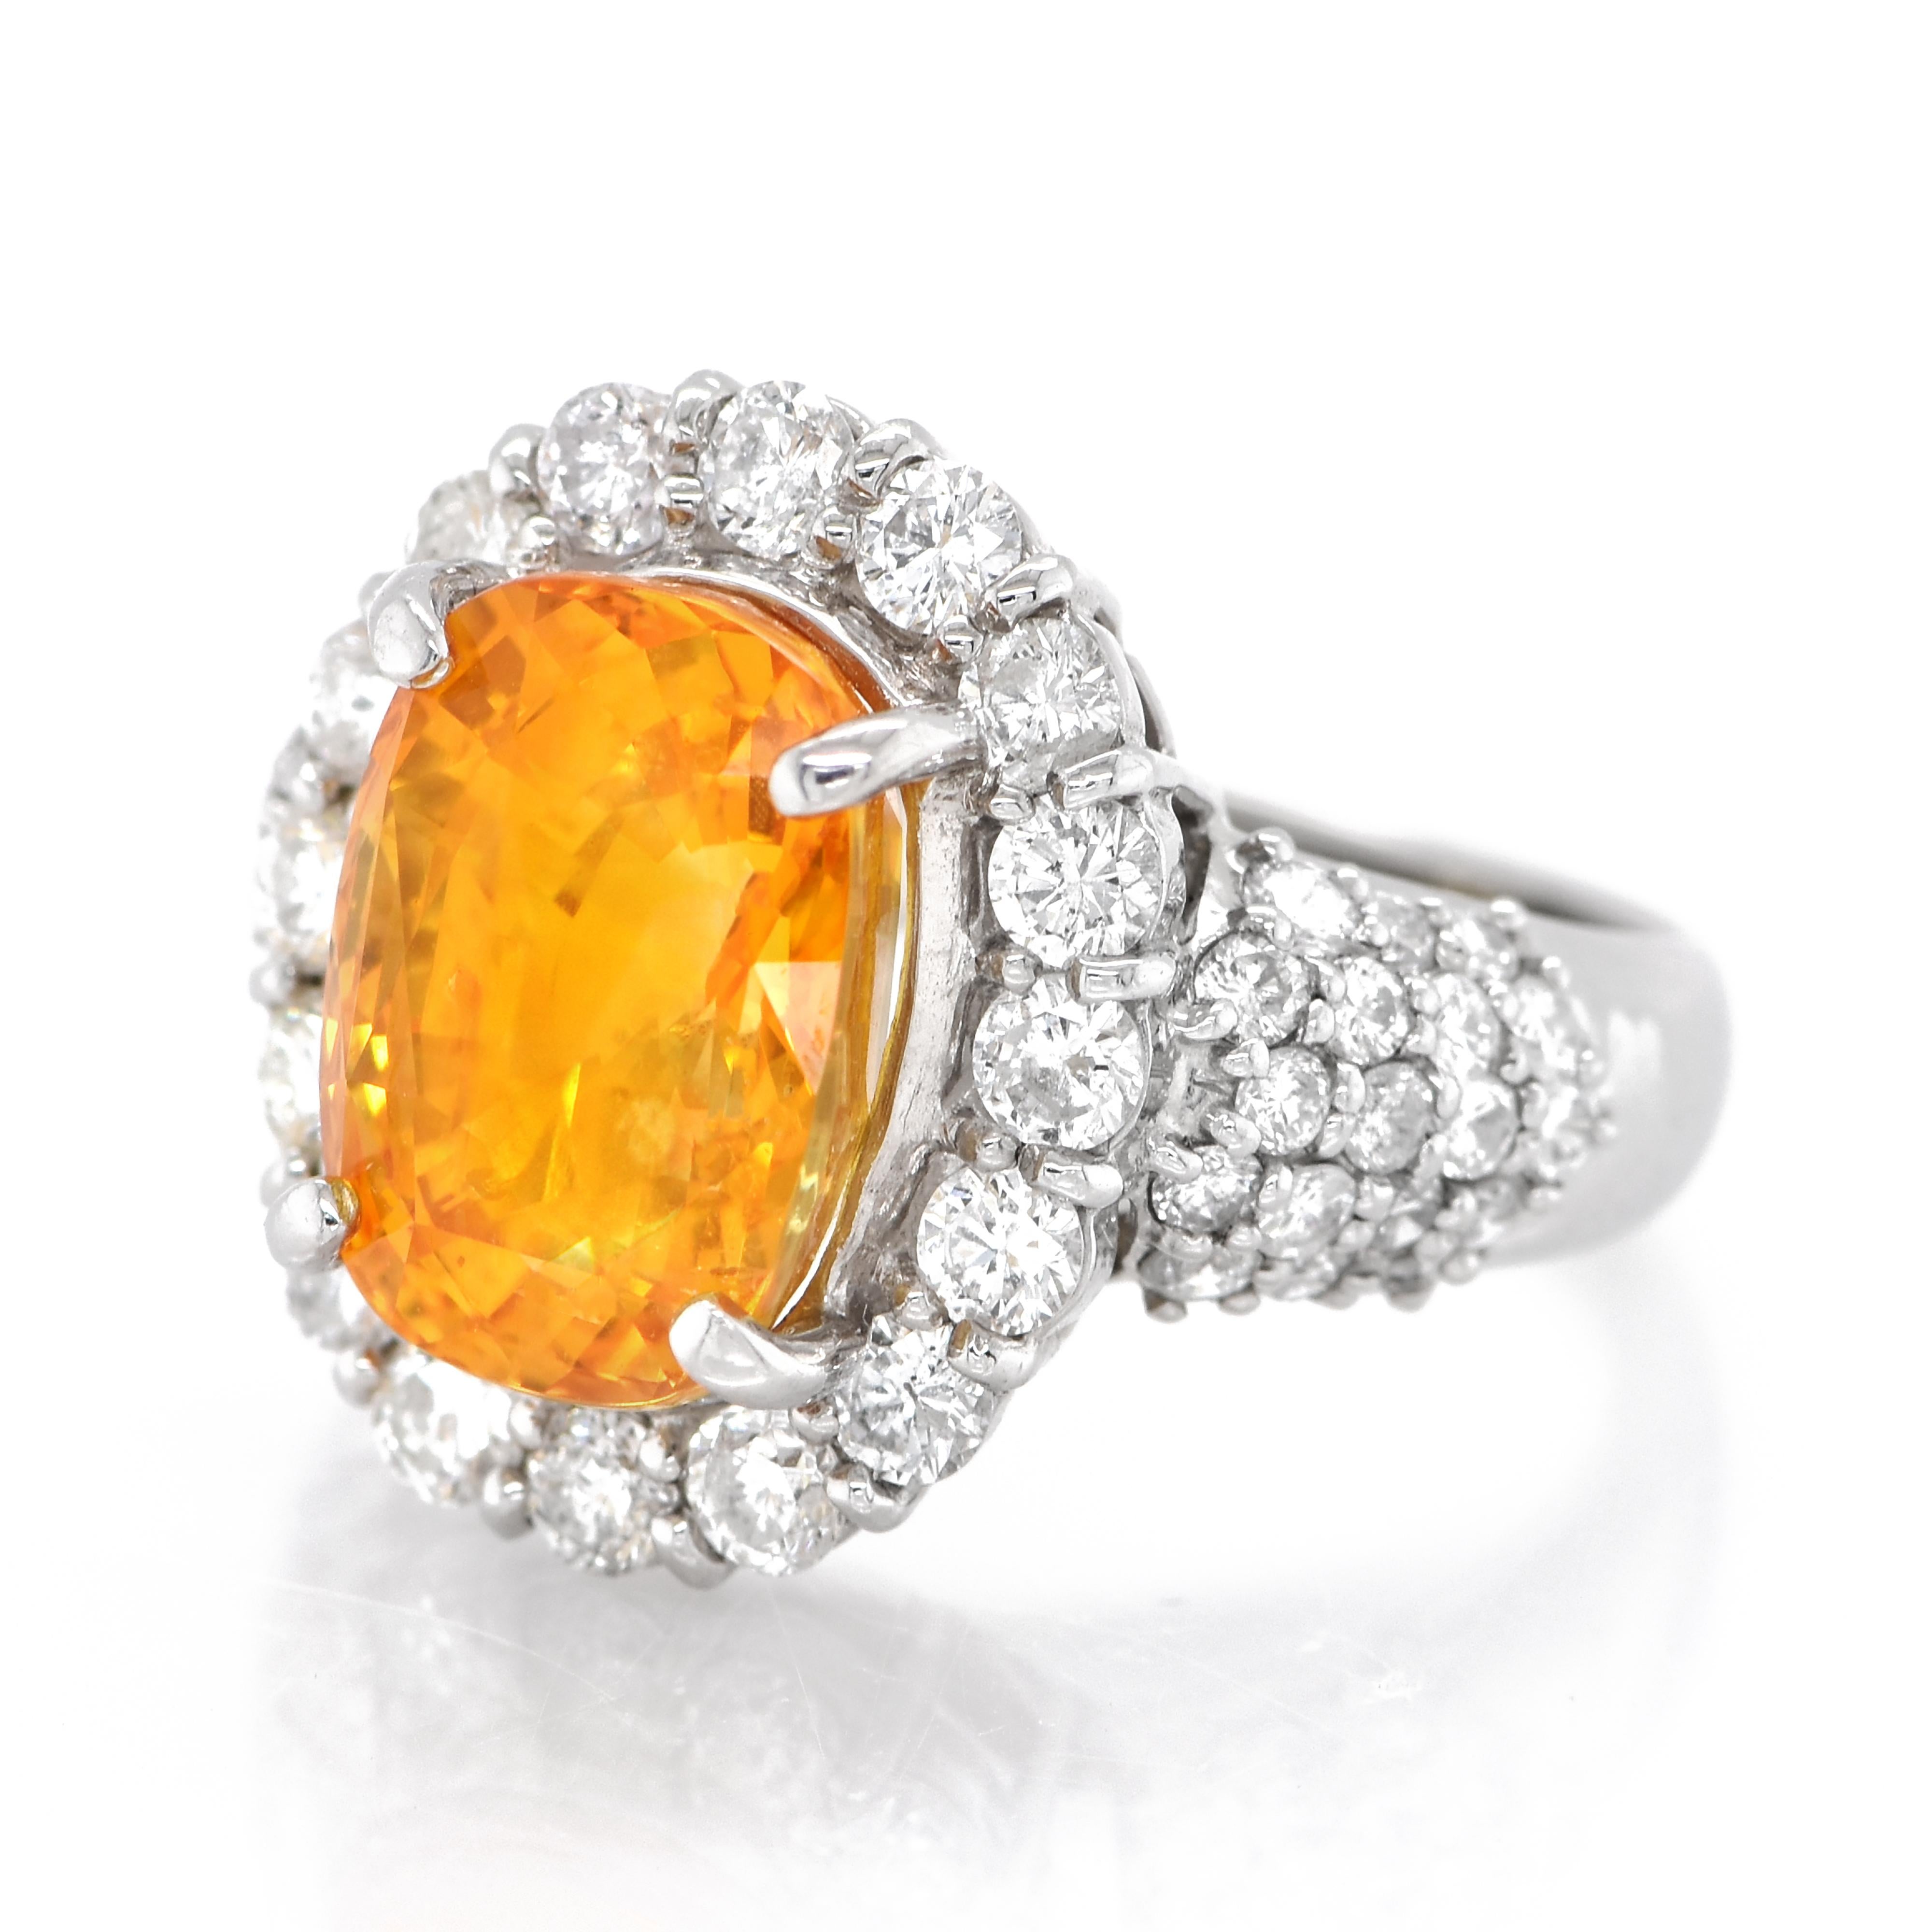 A stunning ring featuring a GIA Certified 6.10 Carat Natural Yellow Sapphire and 1.30 Carats of Diamond Accents set in Platinum. Sapphires have extraordinary durability - they excel in hardness as well as toughness and durability making them very